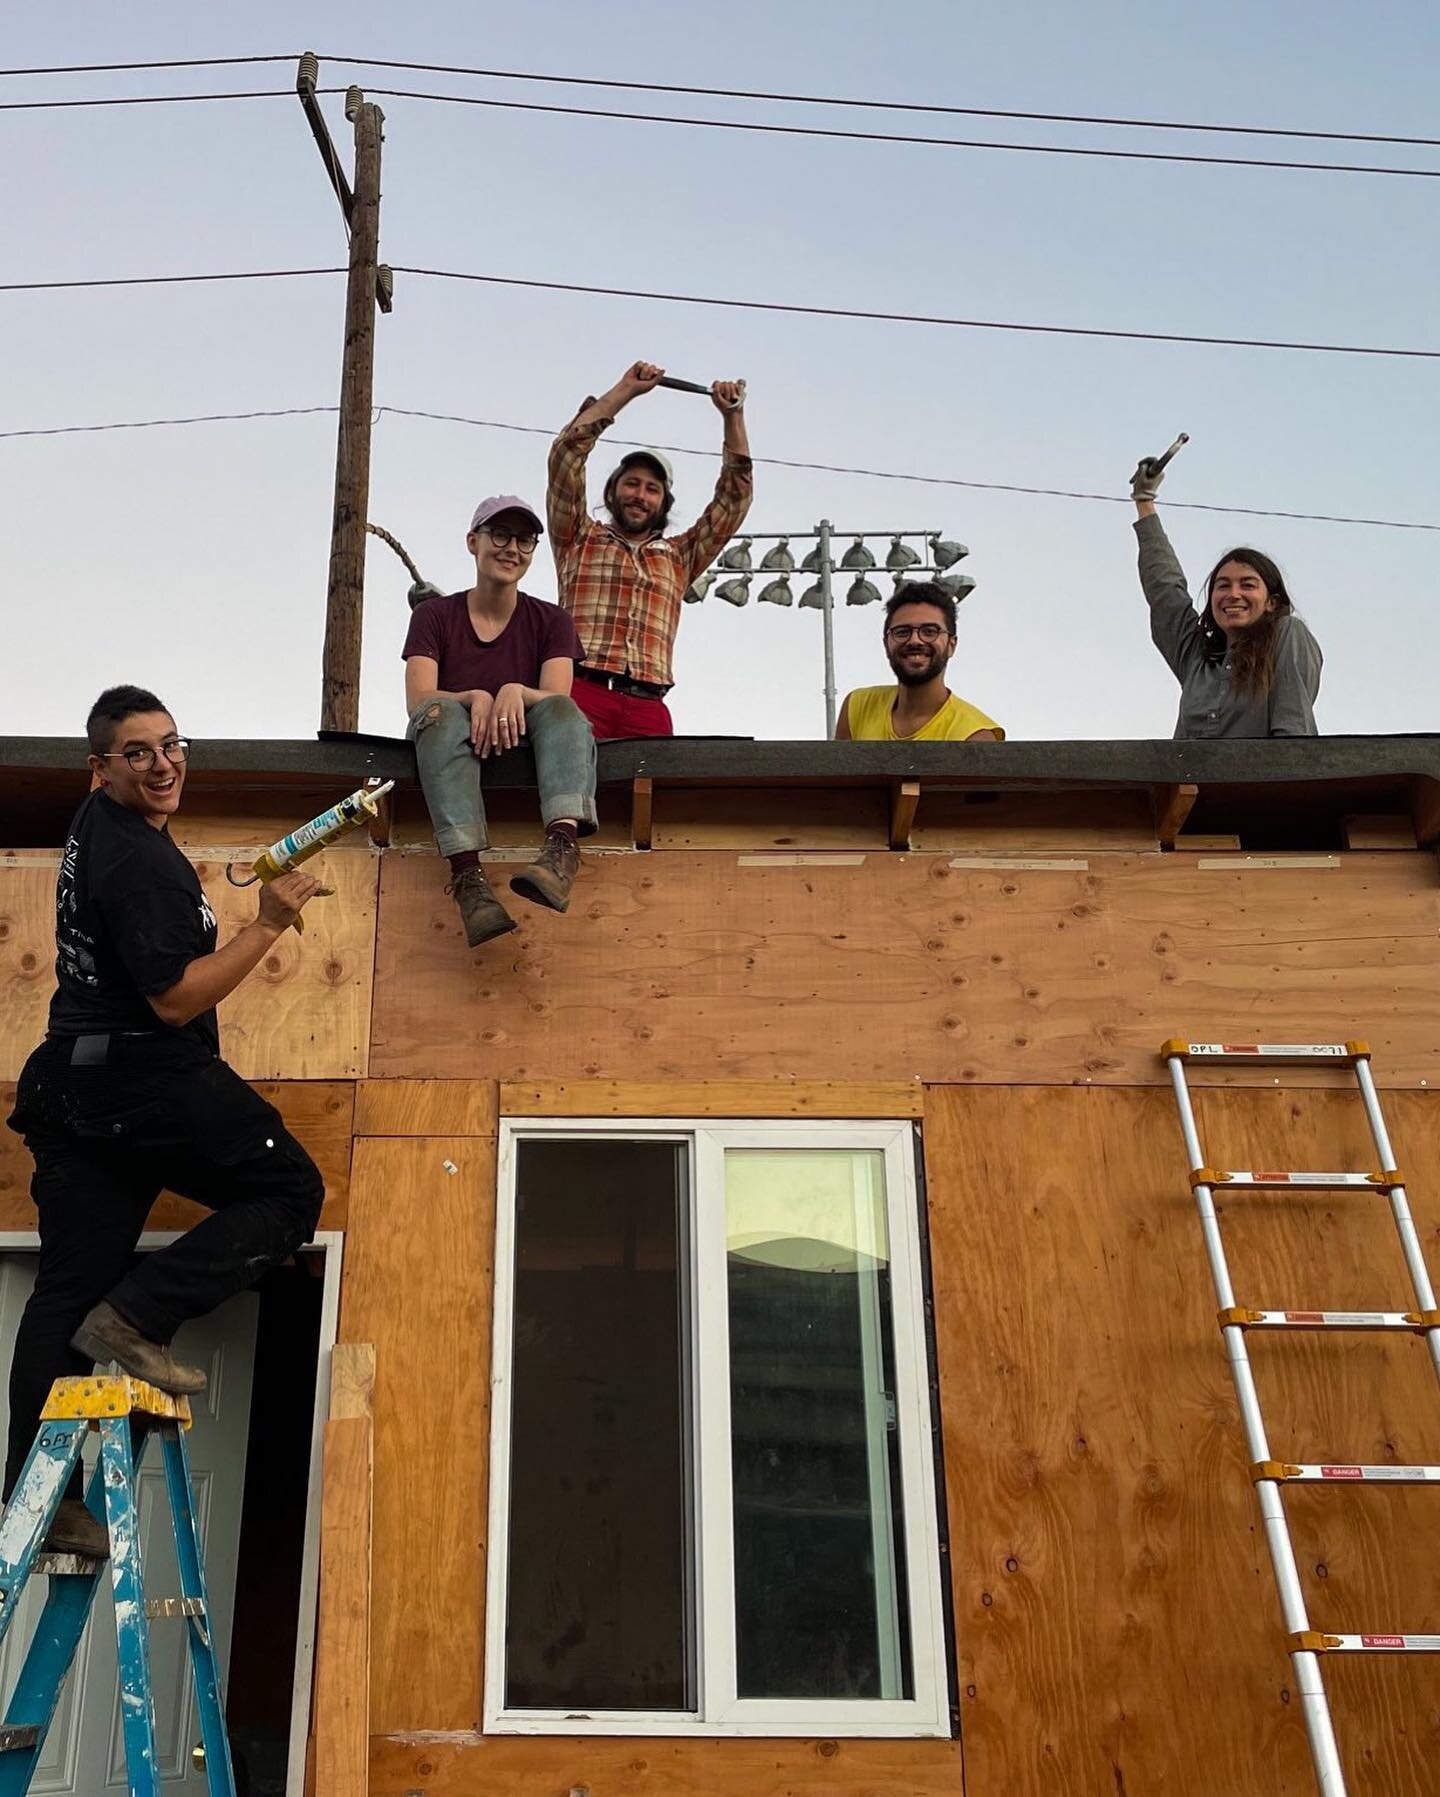 🚨Urgently Need Your Help!

🏠We&rsquo;re raising $1000 as we complete Tiny Home 13 and prepare for Tiny Home 14.

👉Tap Link in Bio to donate!

🙏Thank you for supporting our work building emergency tiny homes💚